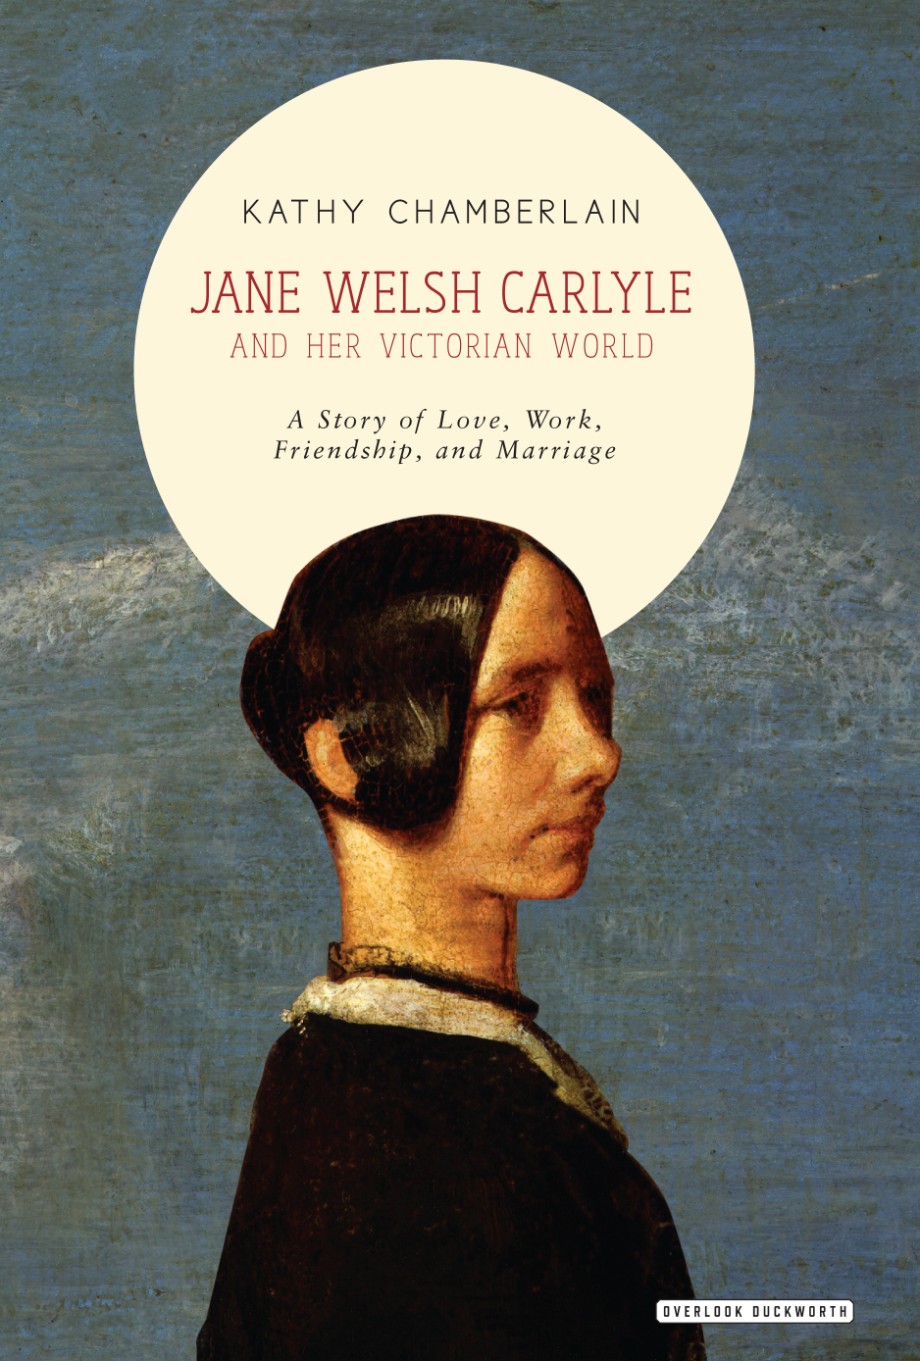 Jane Welsh Carlyle and Her Victorian World A Story of Love, Work, Marriage, and Friendship